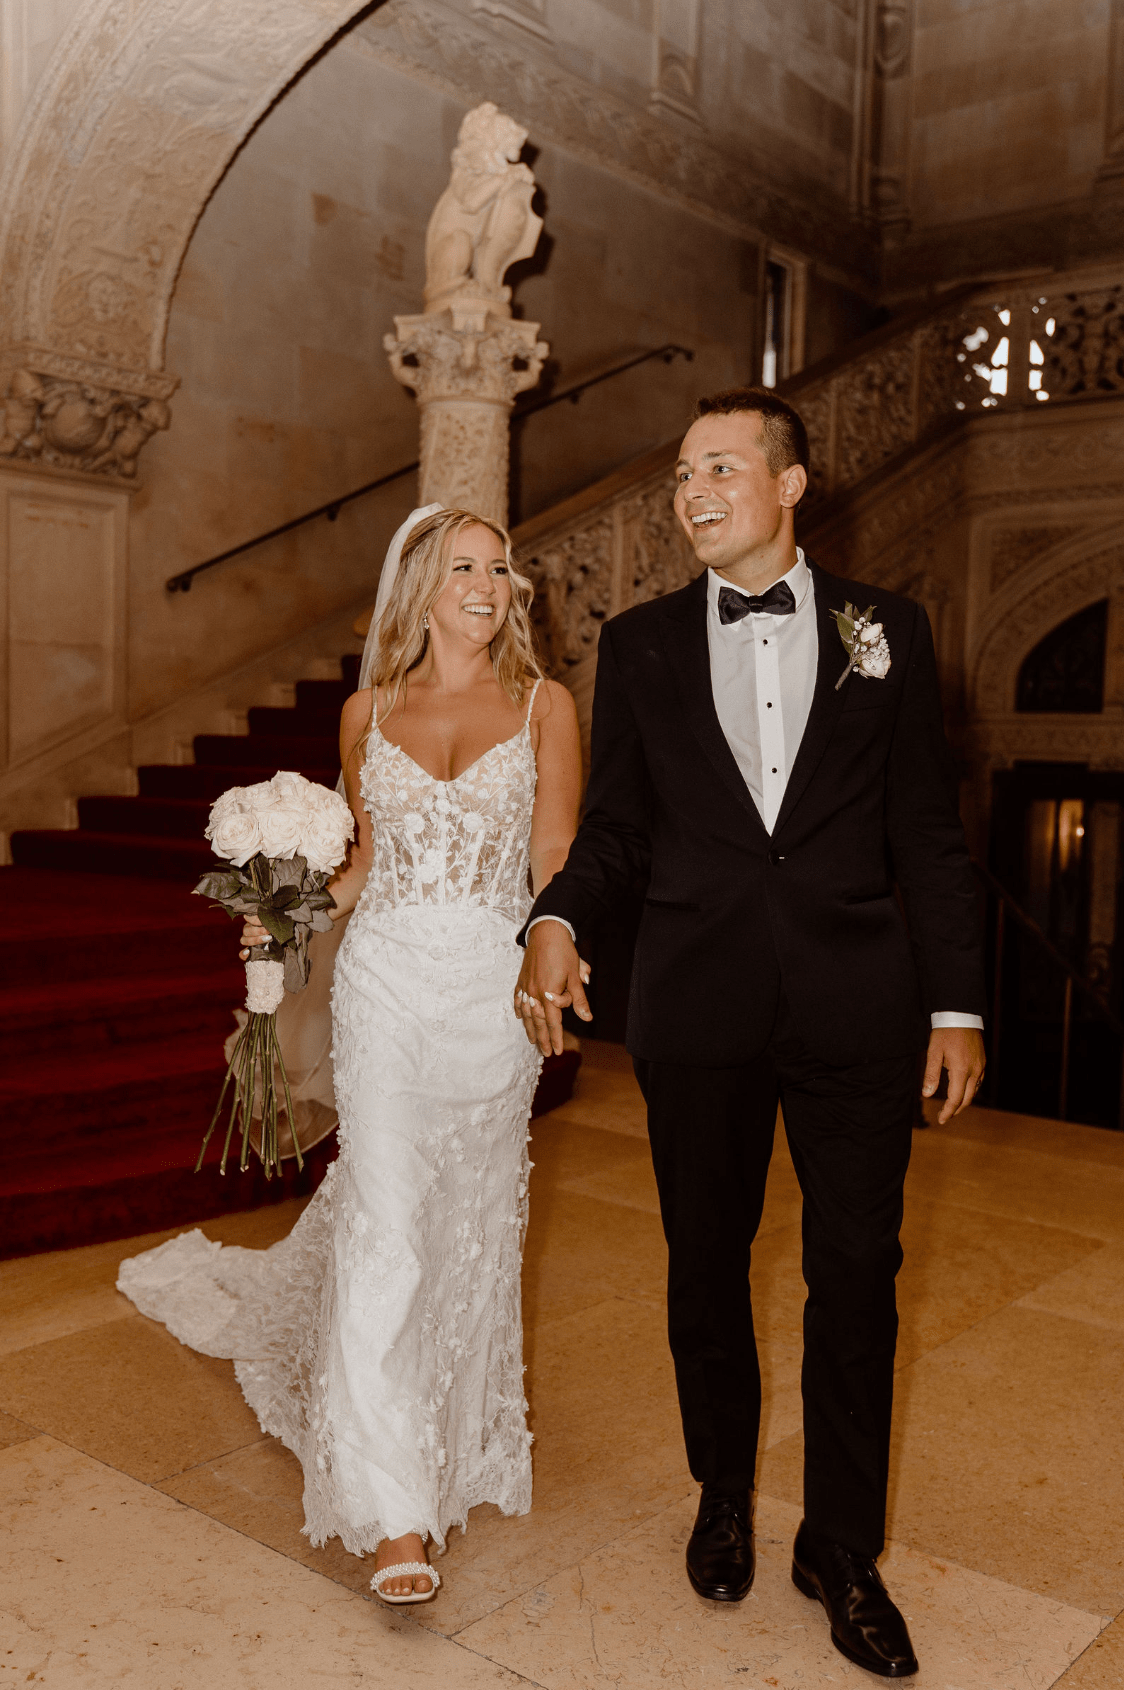 Newlyweds joyfully walk hand in hand down an ornate staircase, the bride in a stunning lace gown holding a bouquet of white roses, and the groom in a classic black tuxedo. The grand architectural details and elegant setting provide a timeless backdrop for this candid, celebratory moment.